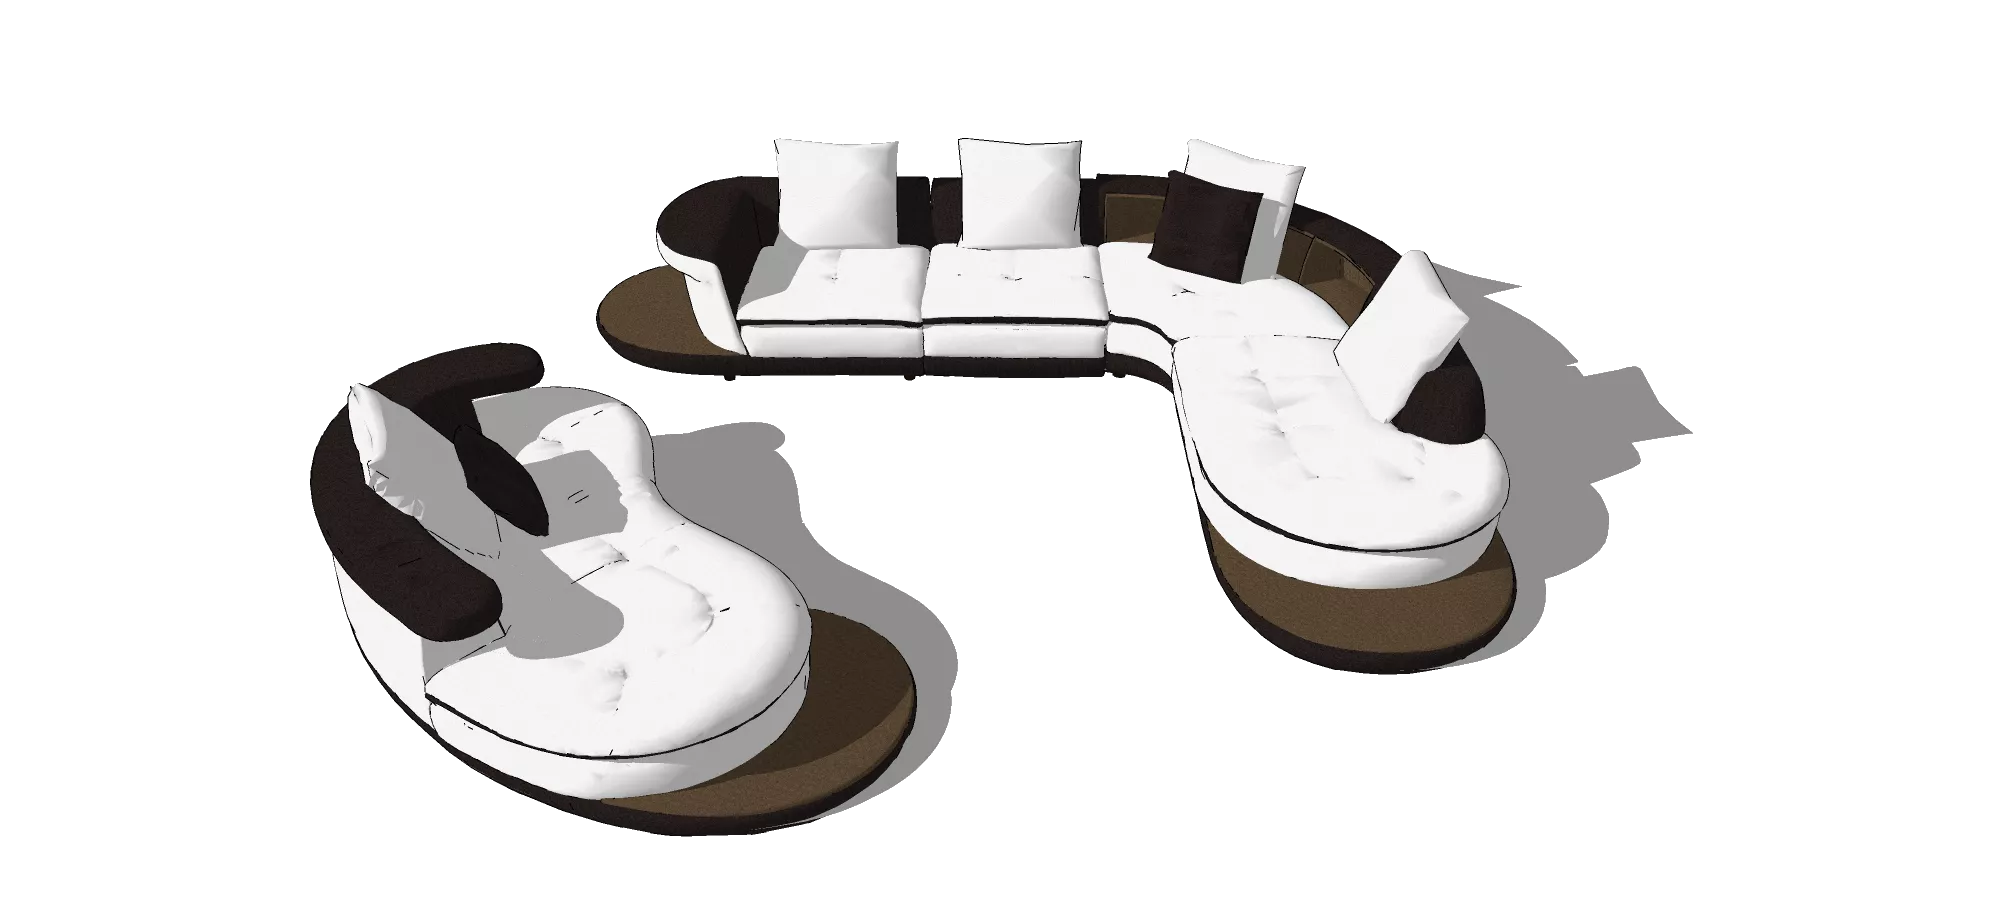 MODERN SOFA - SKETCHUP 3D MODEL - VRAY OR ENSCAPE - ID13082